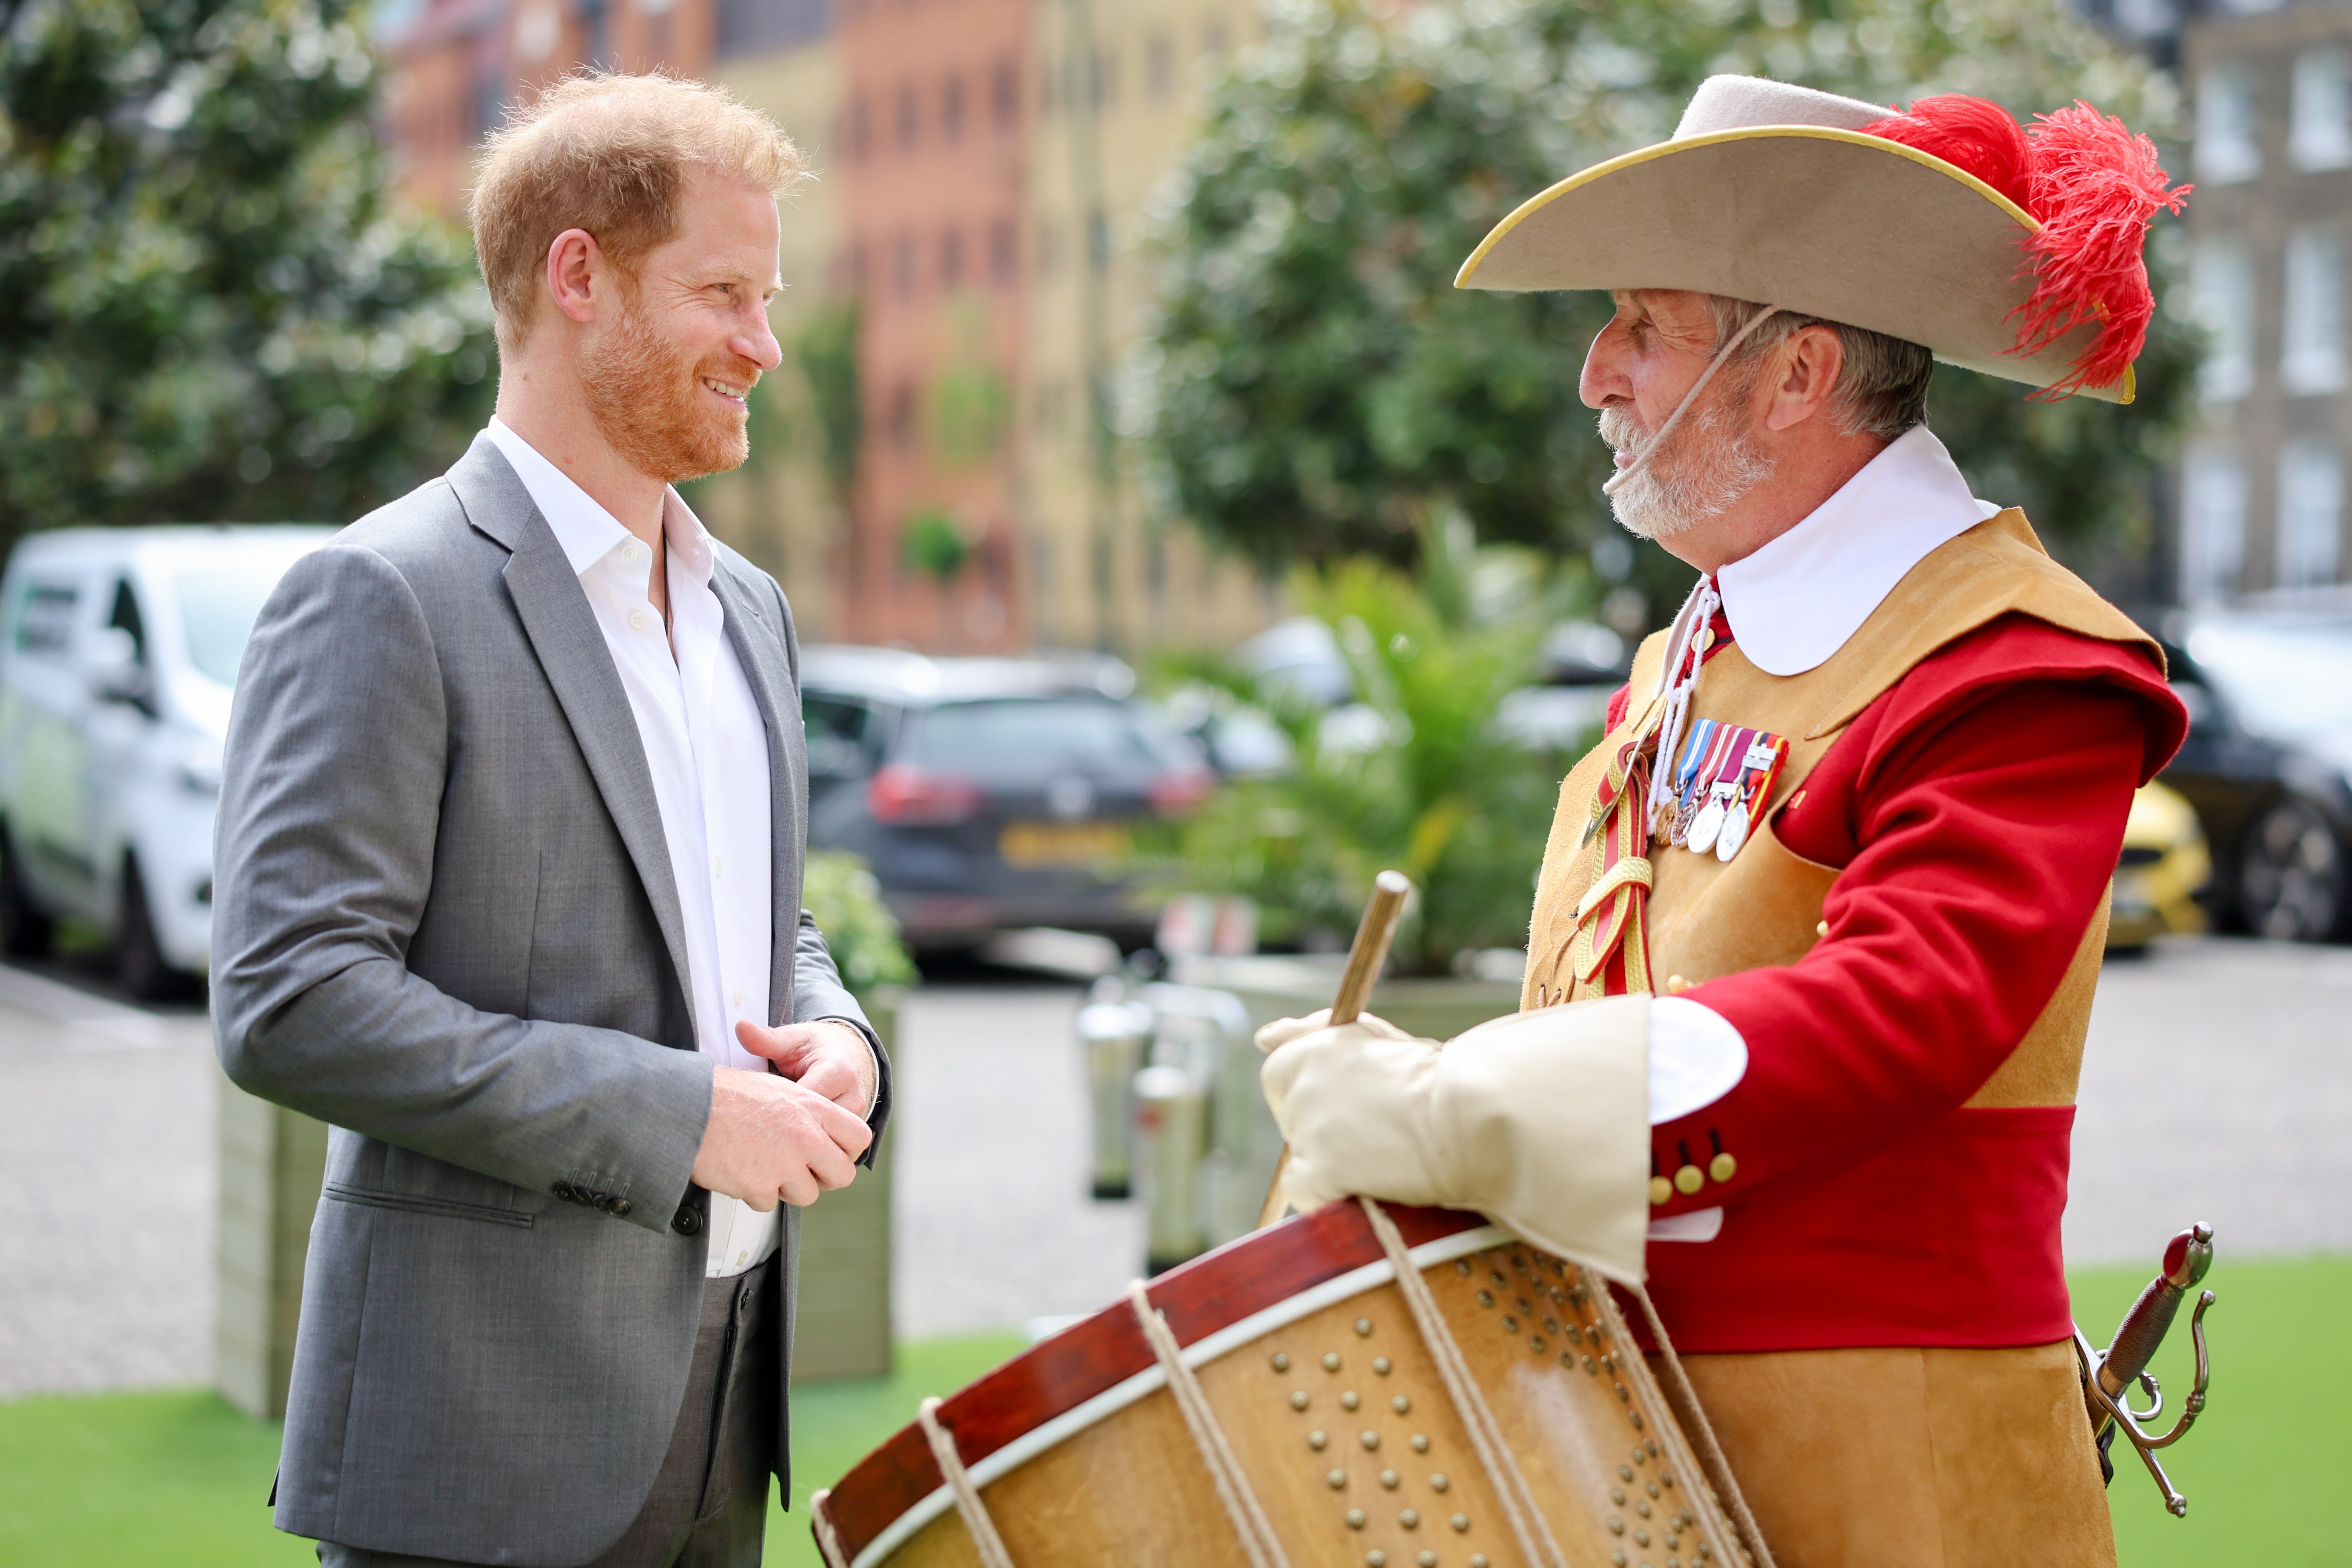 Prince Harry was all smiles when celebrating the Invictus anniversary in London today